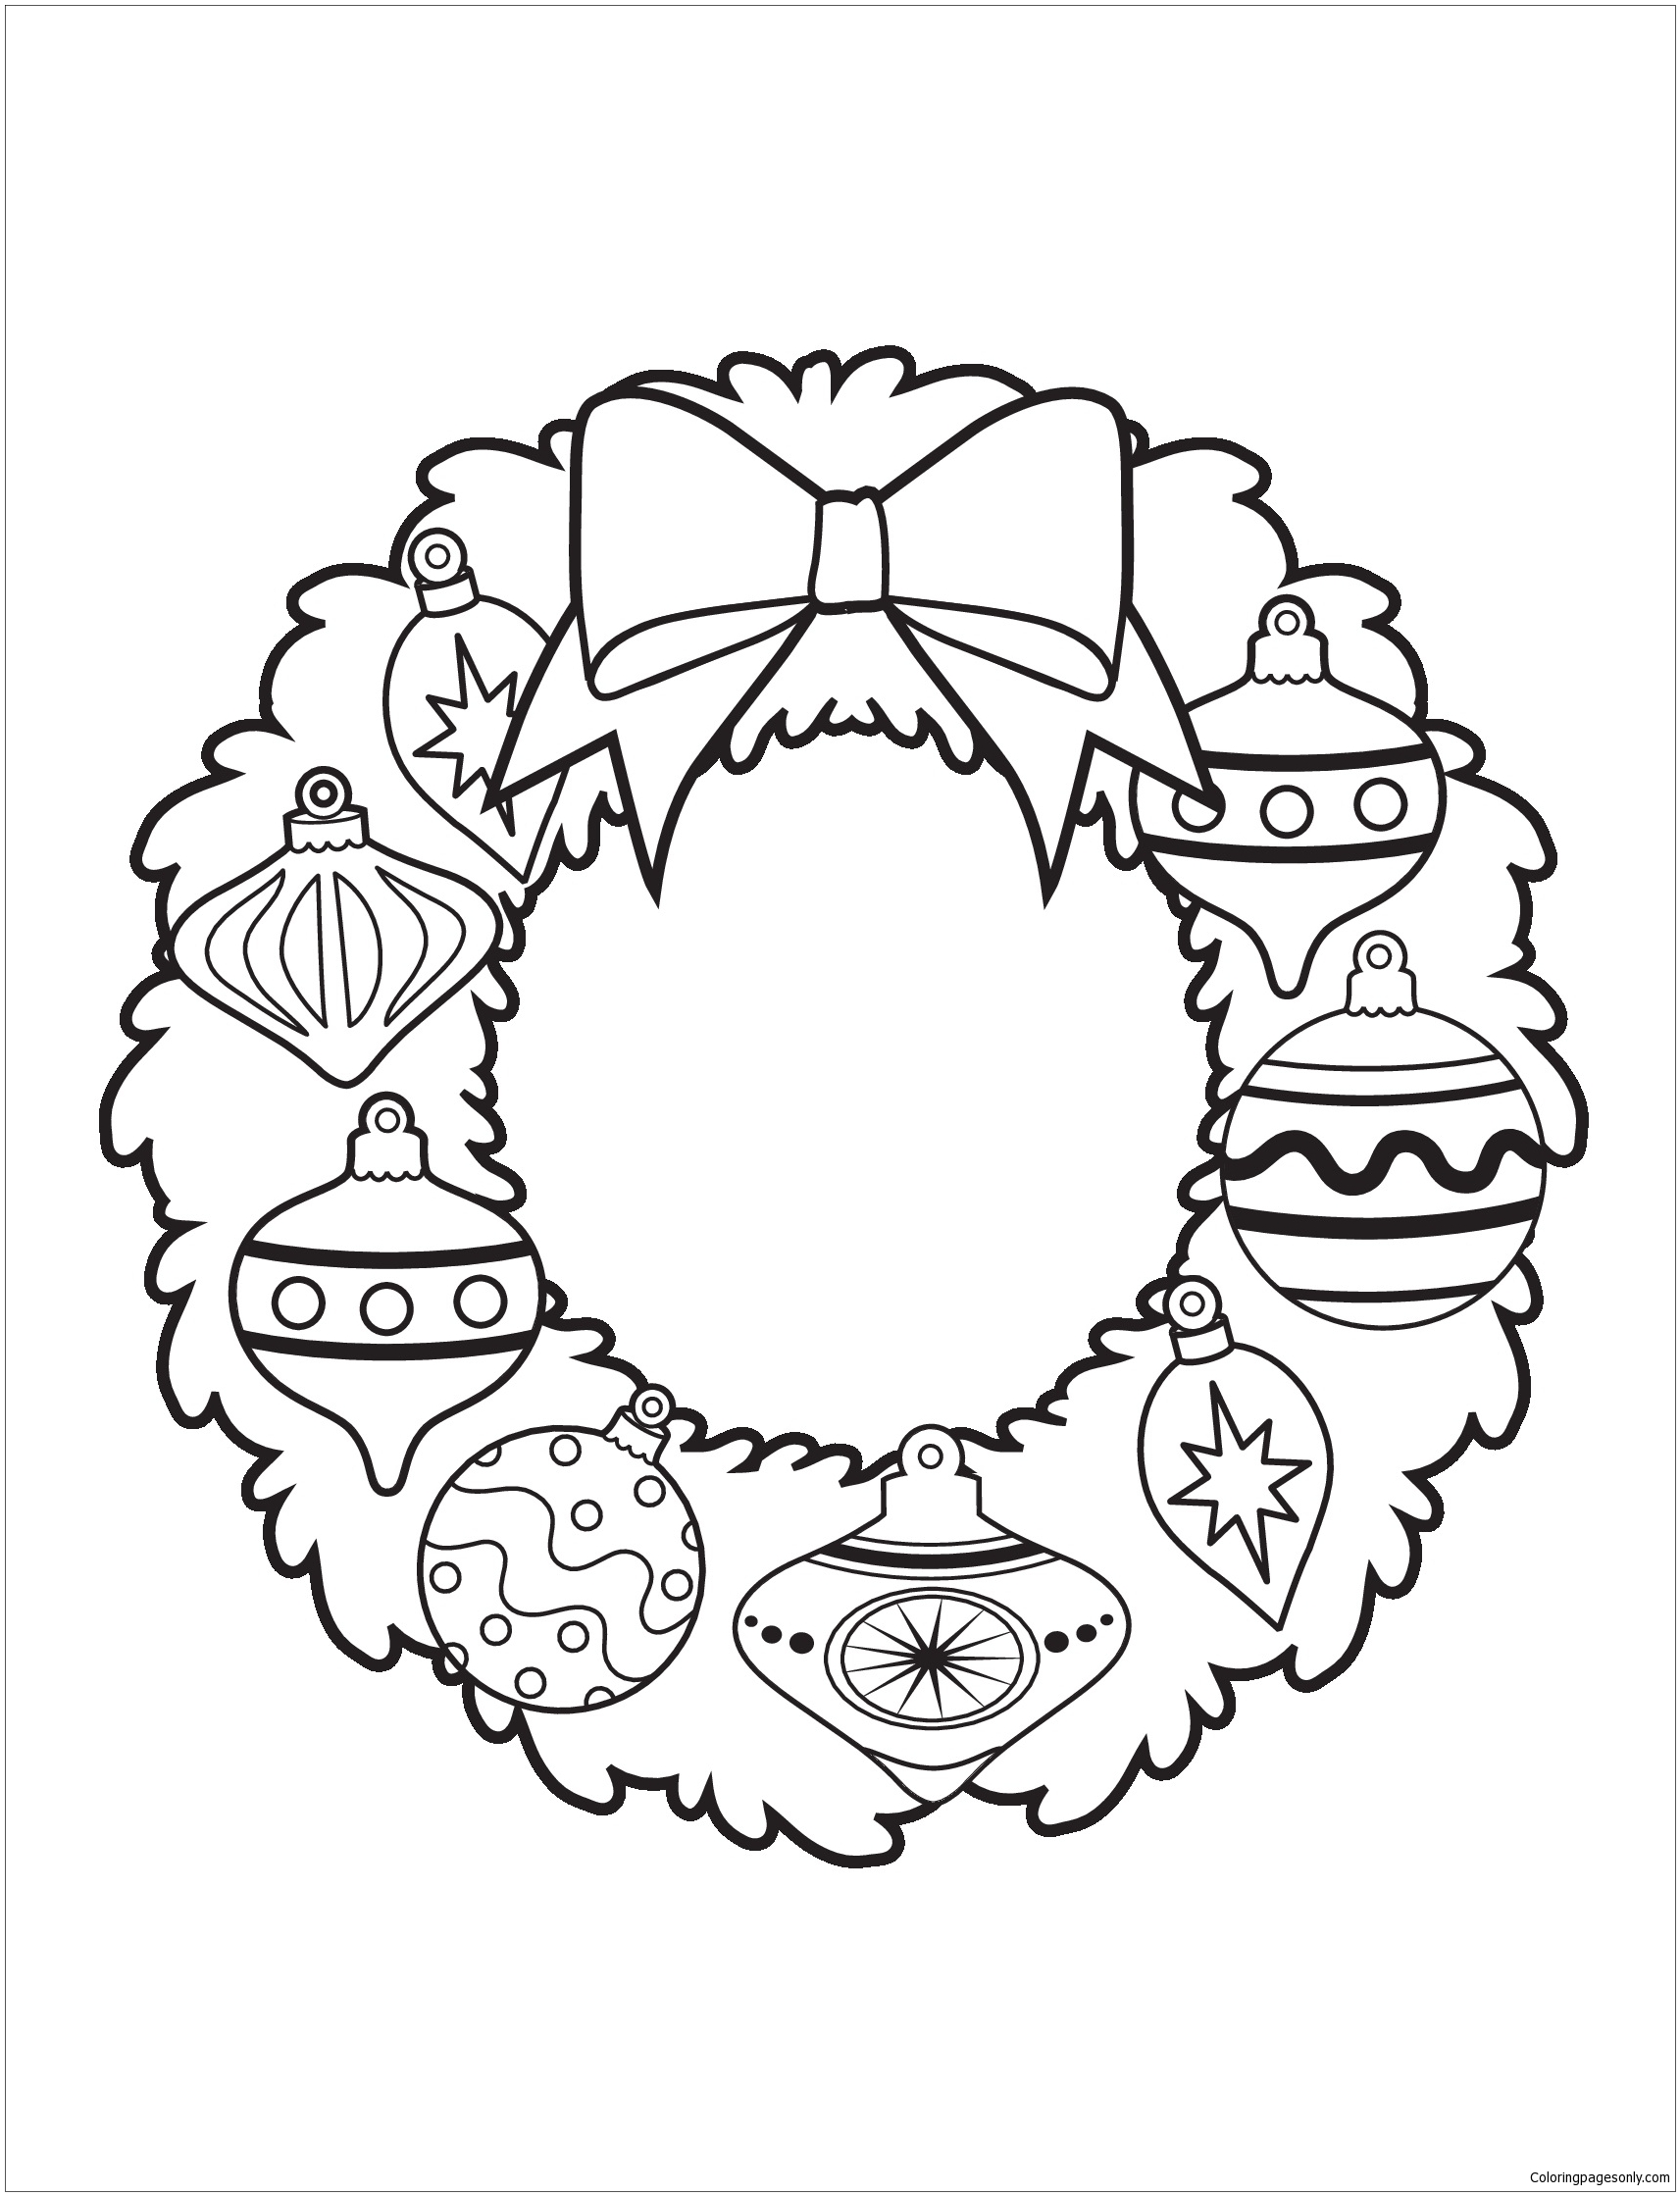 Ornament Wreath Christmas Coloring Pages - Christmas Coloring Pages